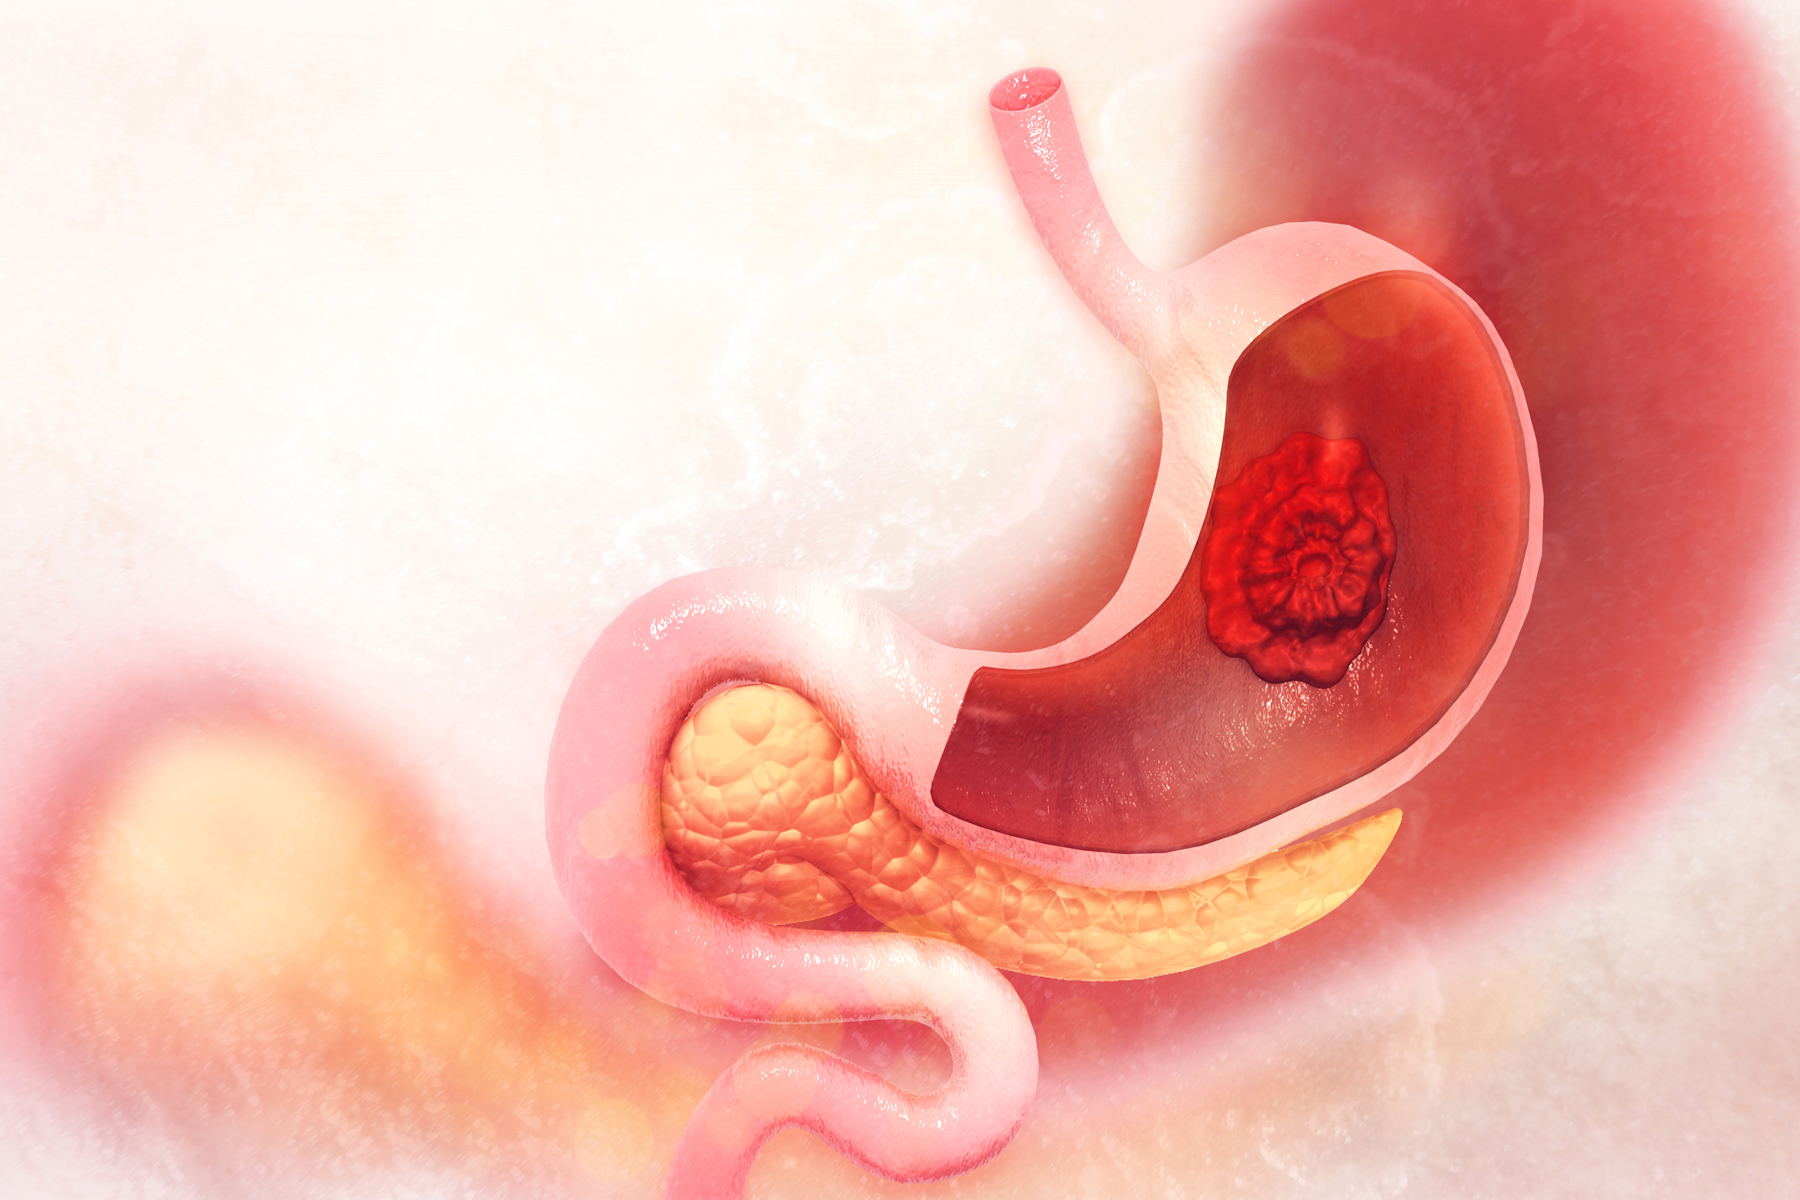 What is stomach cancer?